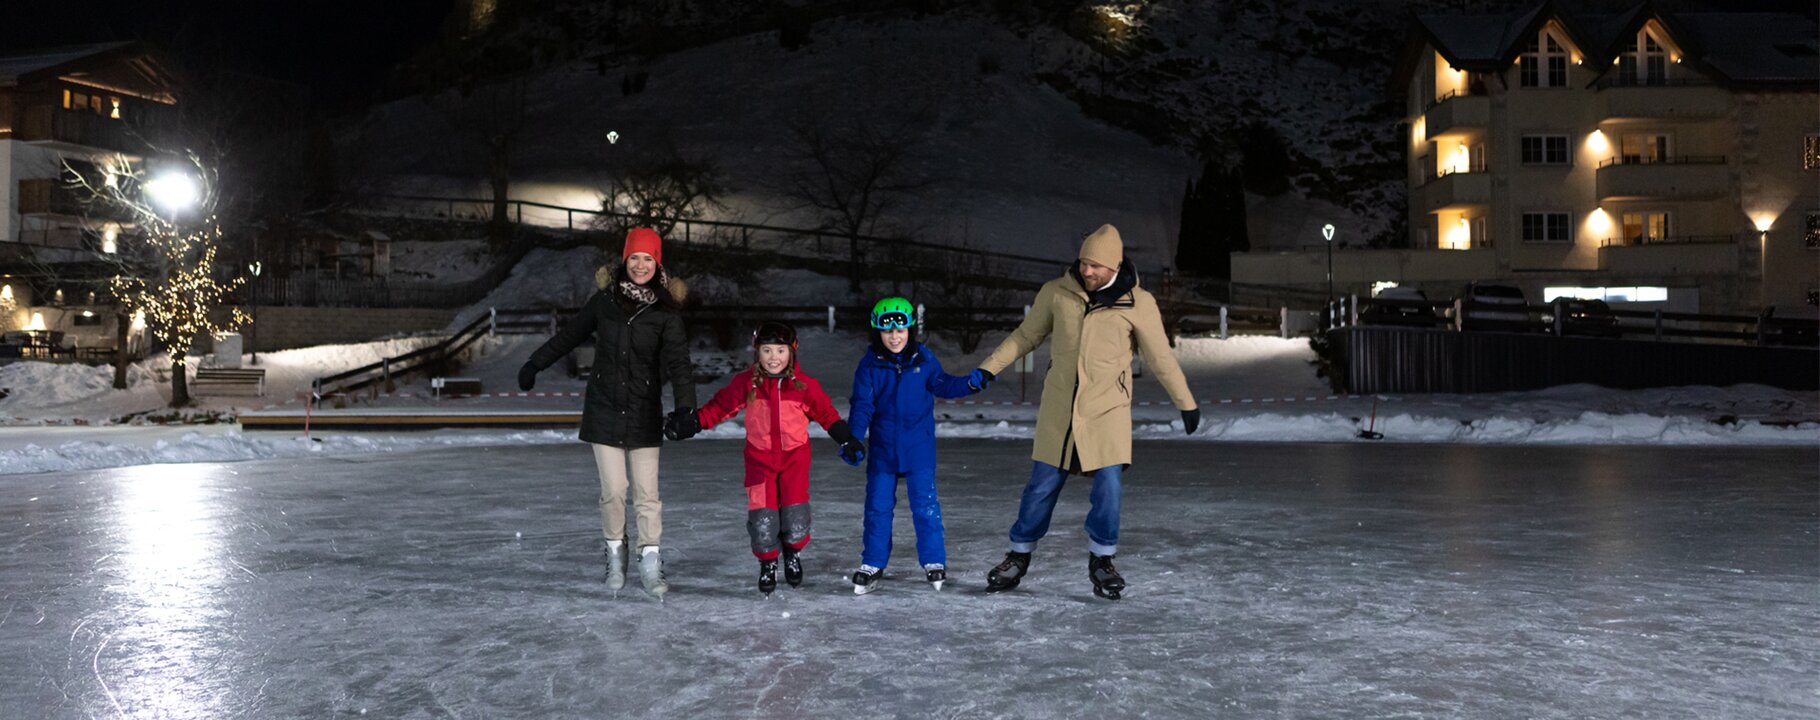 Ice skating - fun for the whole family | © Serfaus-Fiss-Ladis Markting GmbH